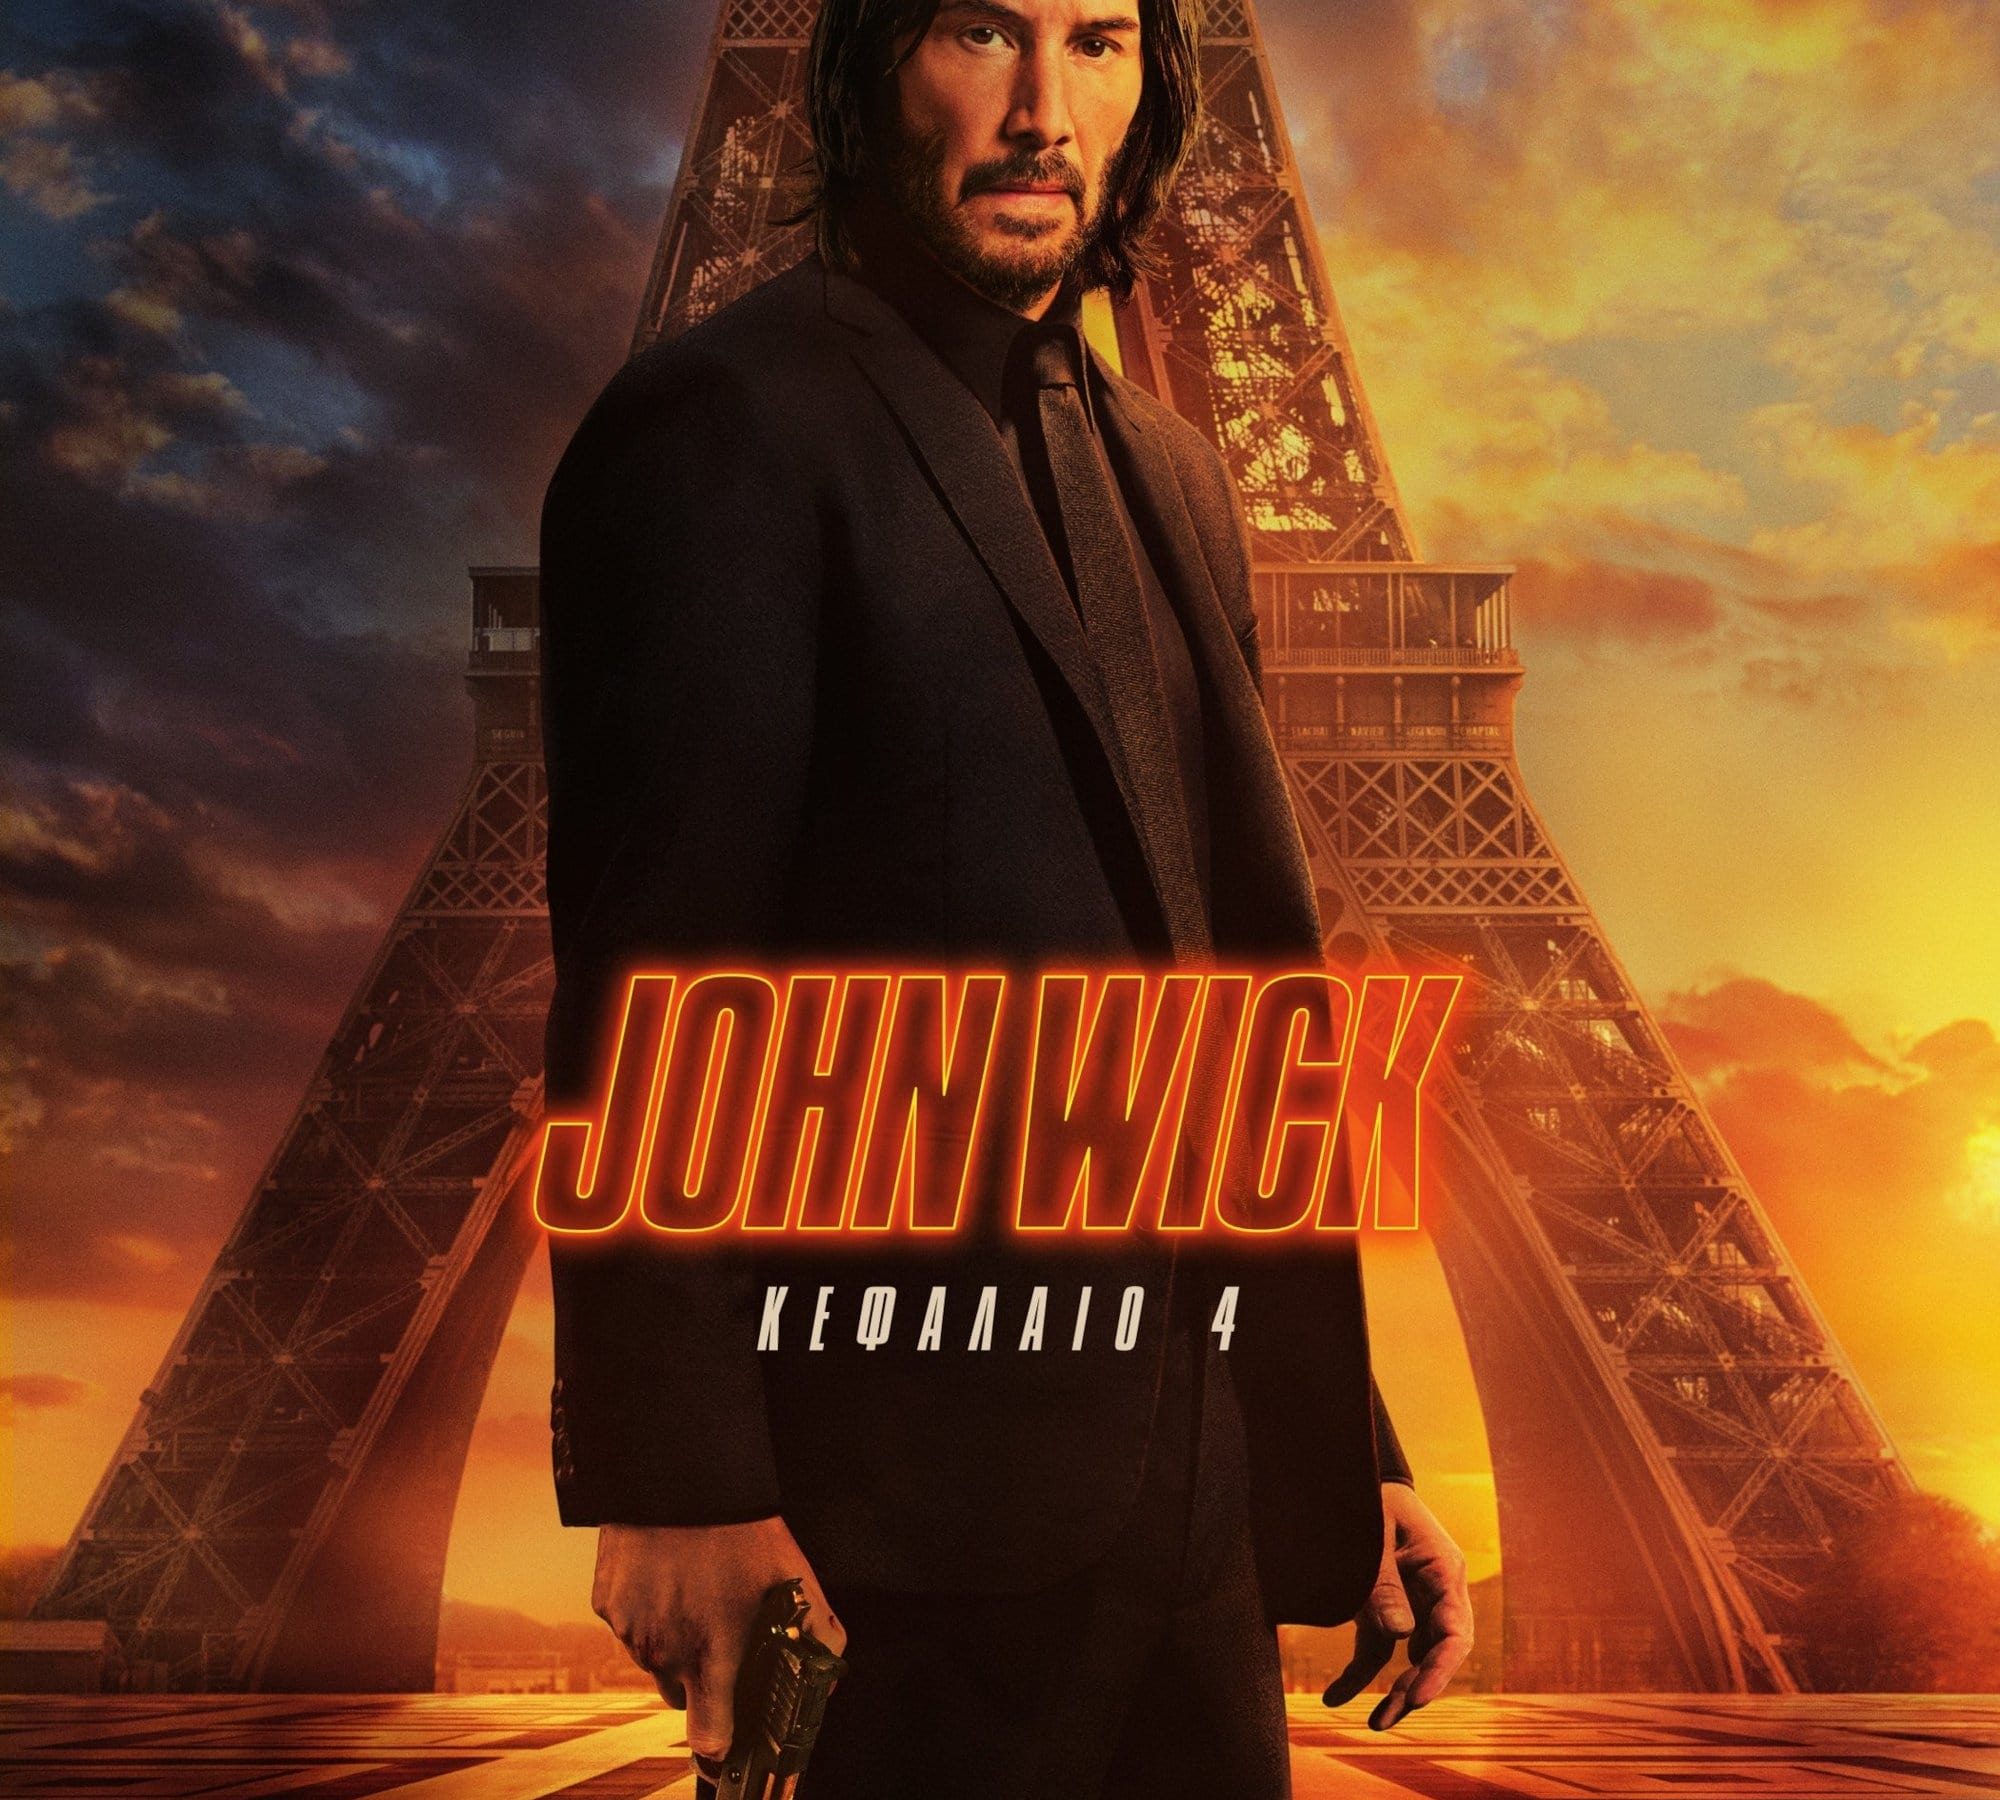 Poster for the movie "John Wick: Κεφάλαιο 4"